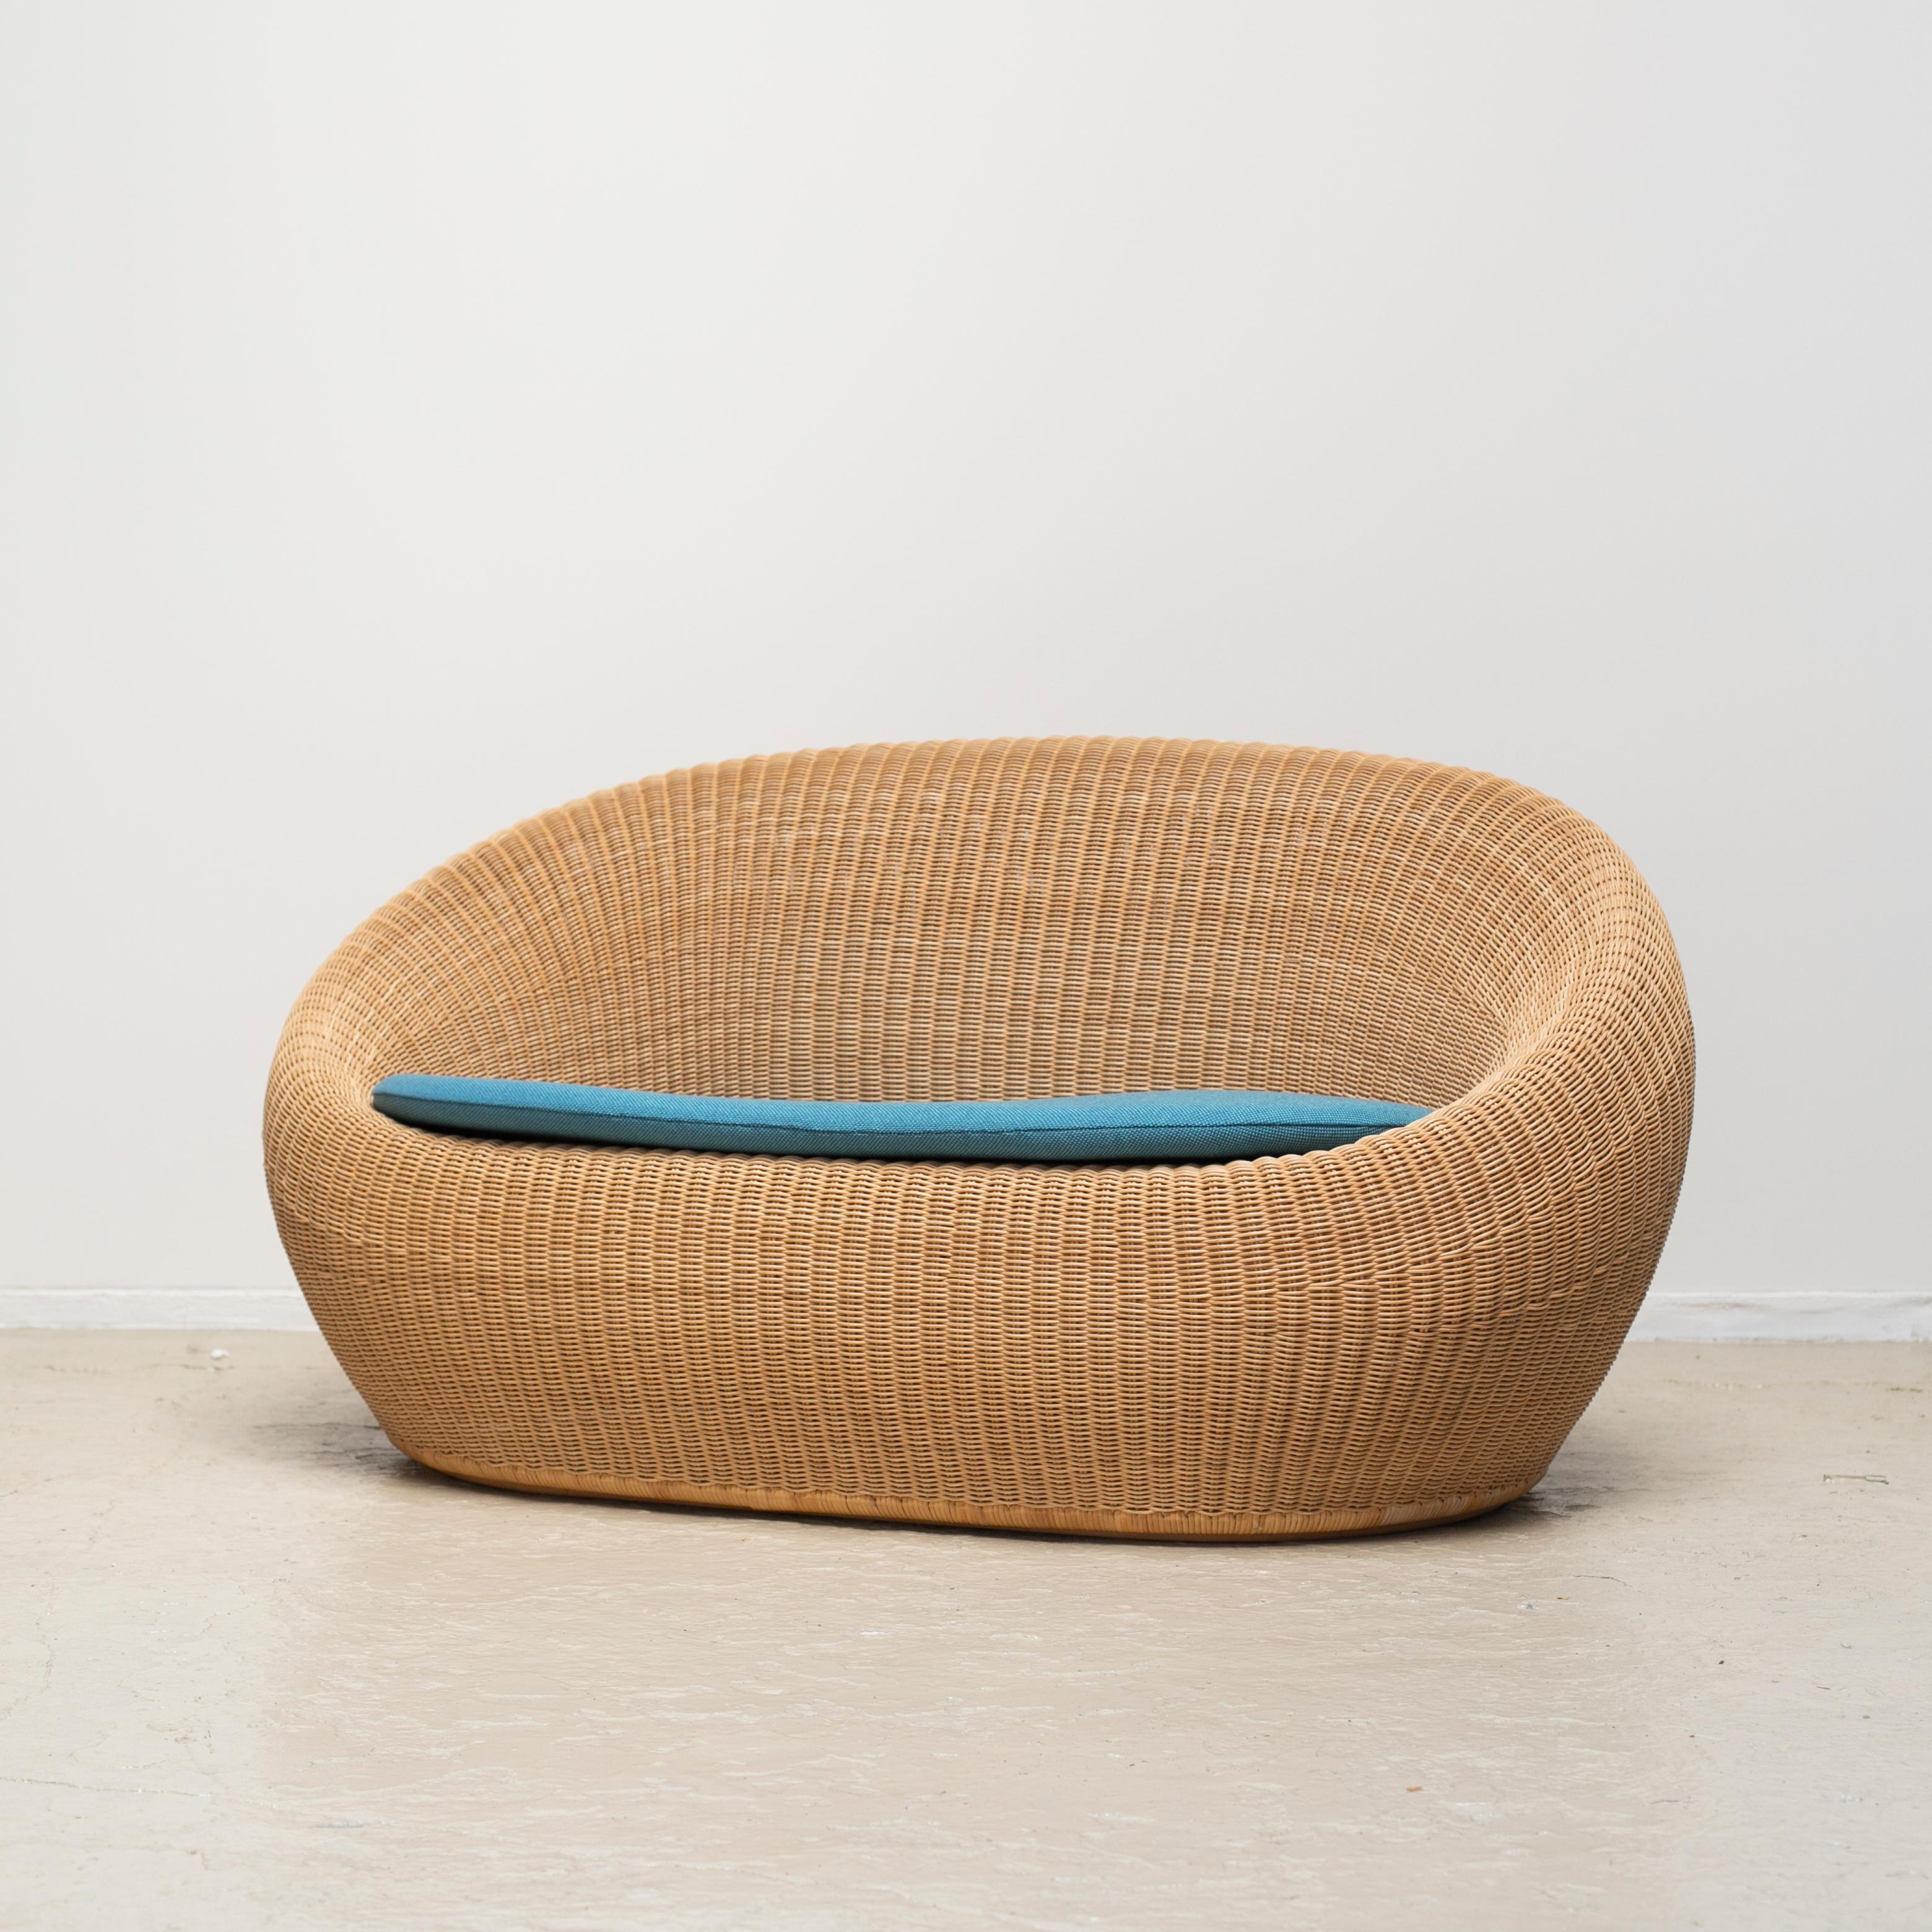 Rattan loveseat designed by Isamu Kenmochi.
Manufactured by YMK in the early 2000s.
A cushion is newly made for this.